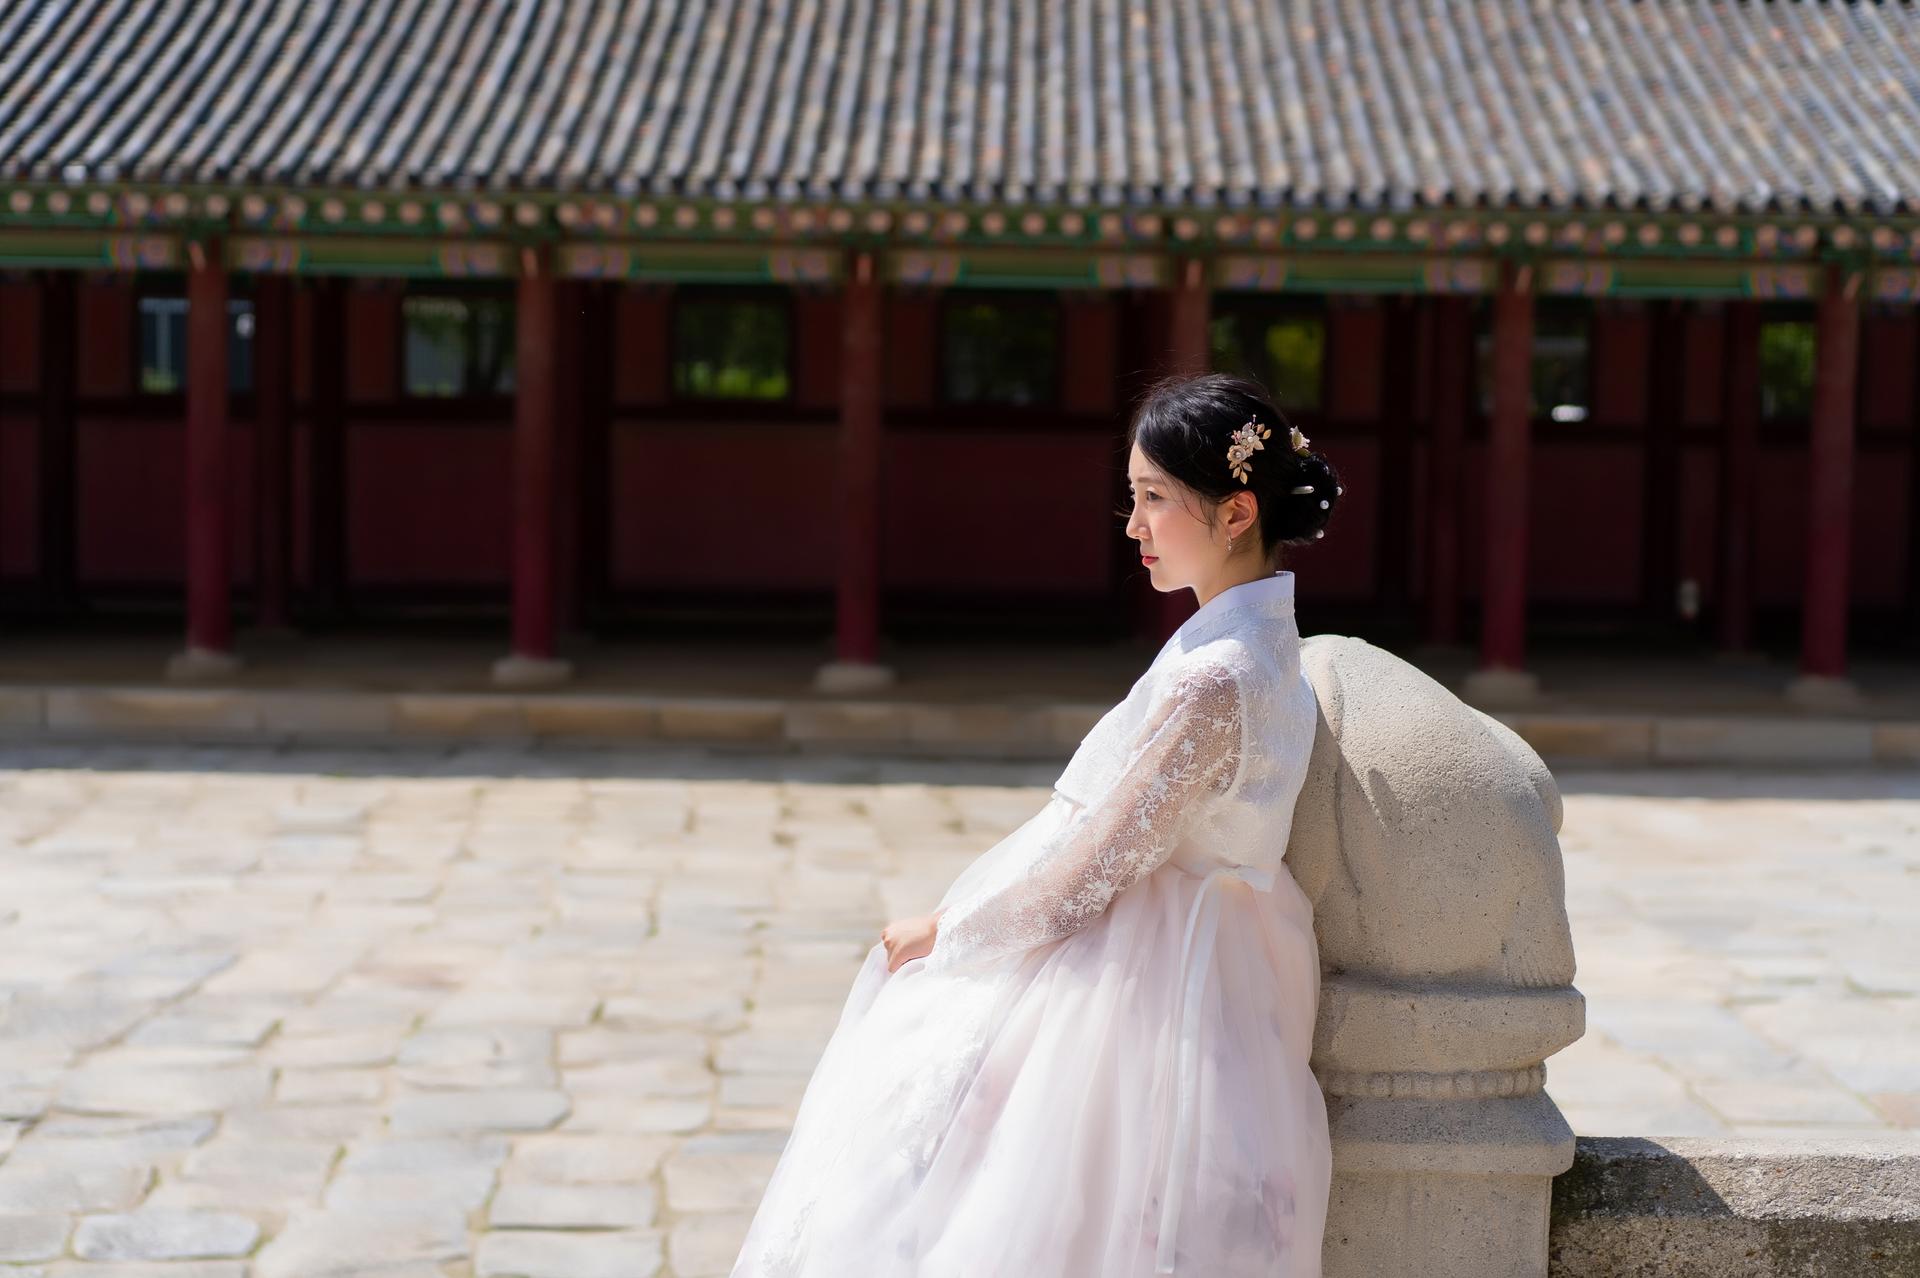 A woman in traditional Korean hanbok clothing standing outside a temple rental shop, adorned with embellishments and sweeping sleeves.